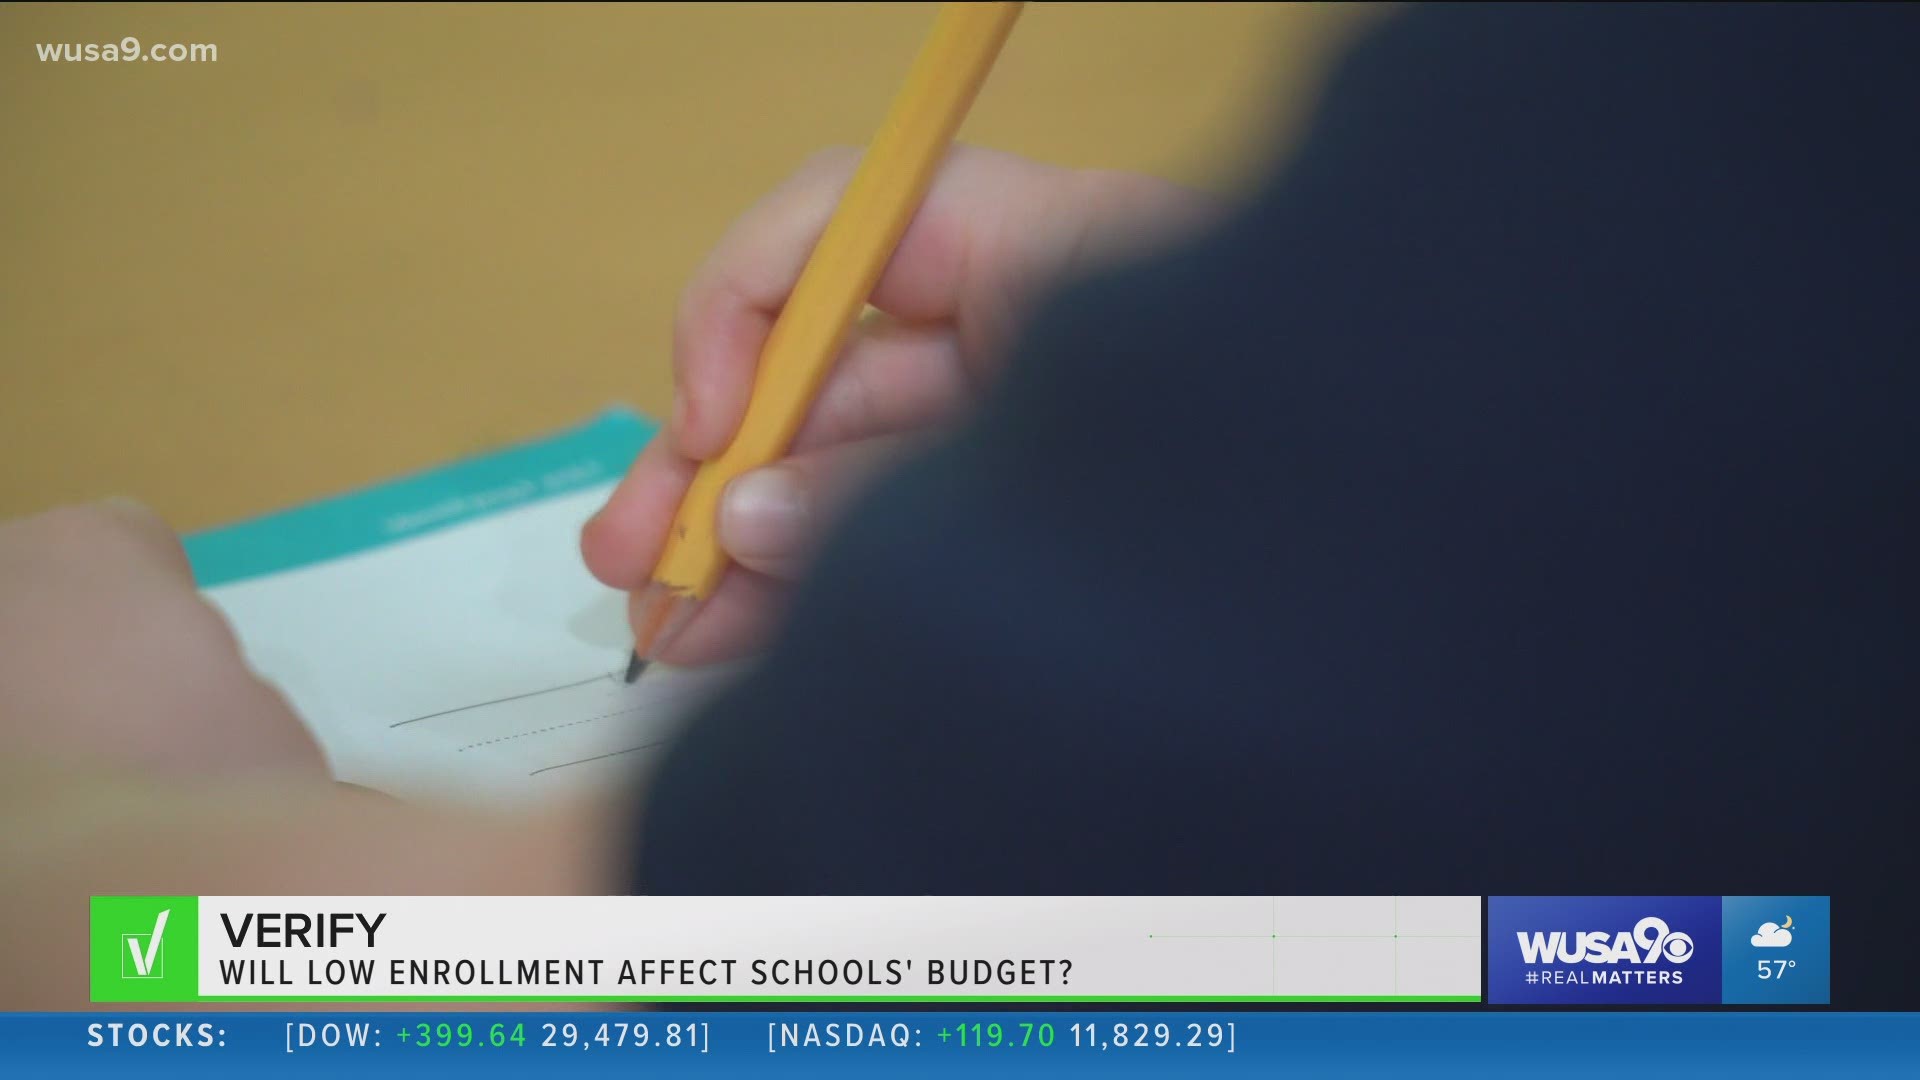 Communities in the DMV are worried that lower enrollments rates at public schools amid the COVID-19 pandemic could impact future financial budgets.